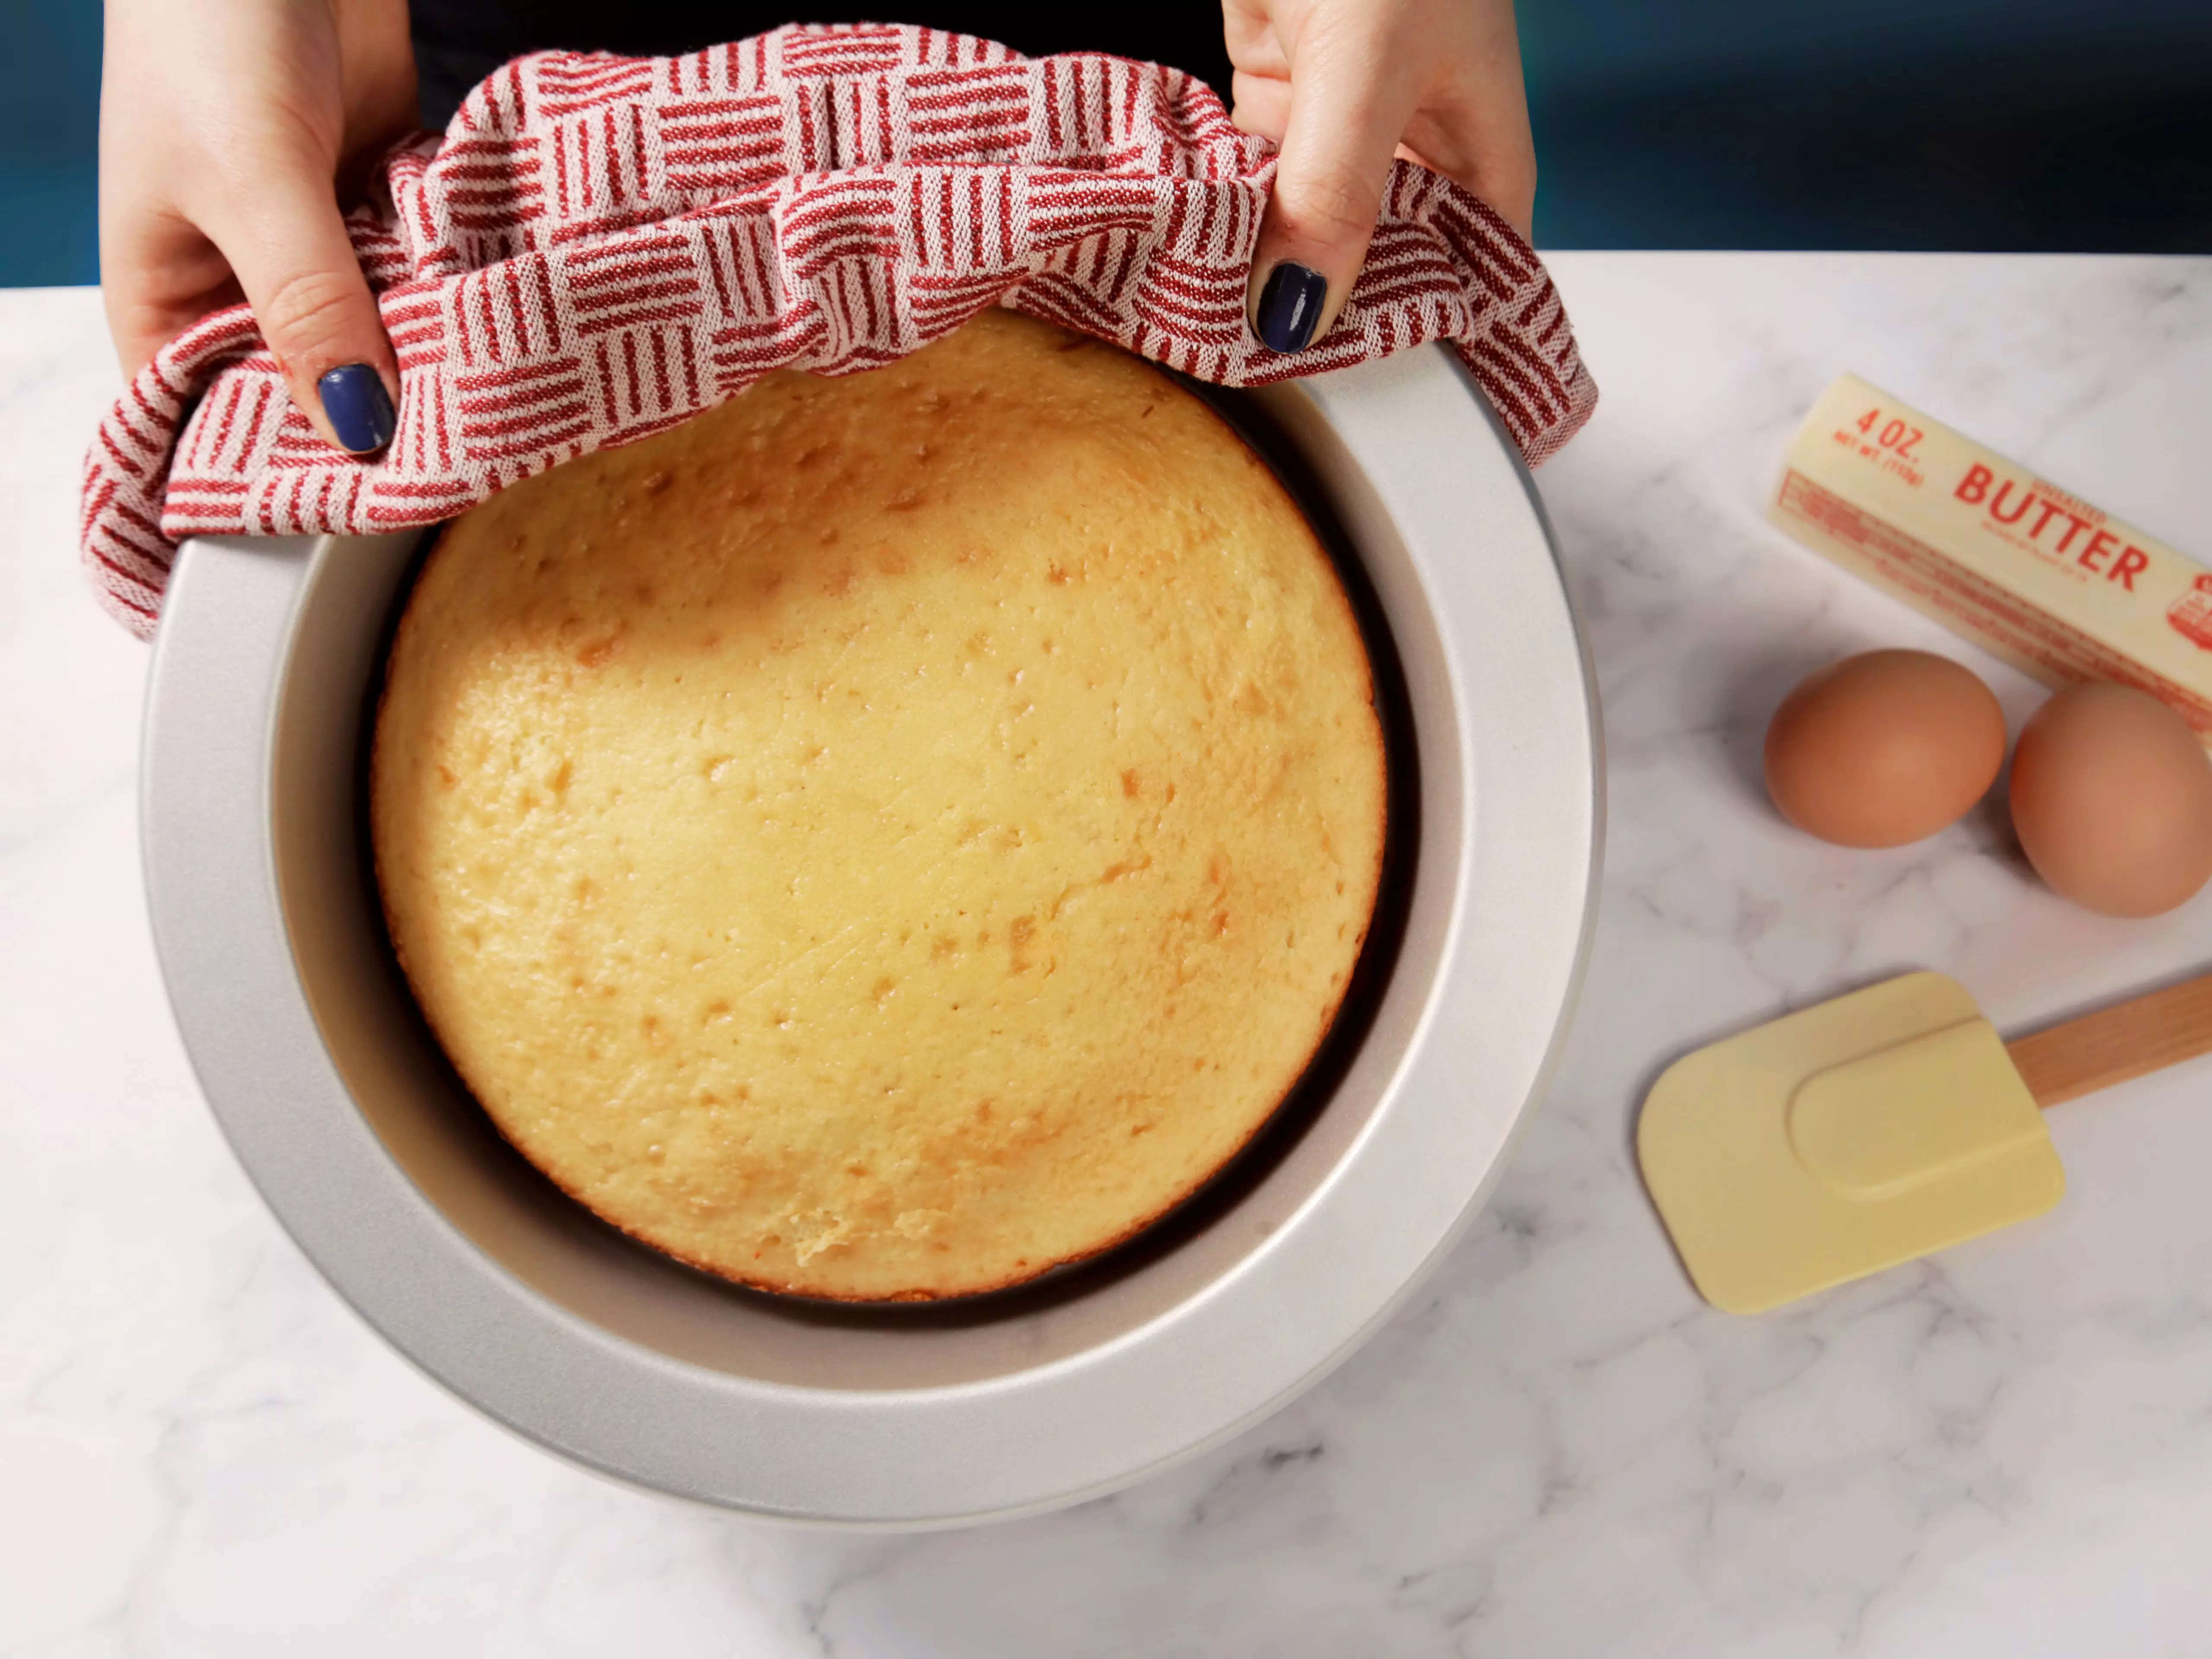 Hands holding a KitchenAid cake pan with a baked cake inside next to a yellow spatula, two eggs, and a stick of butter - best cake pans in 2022